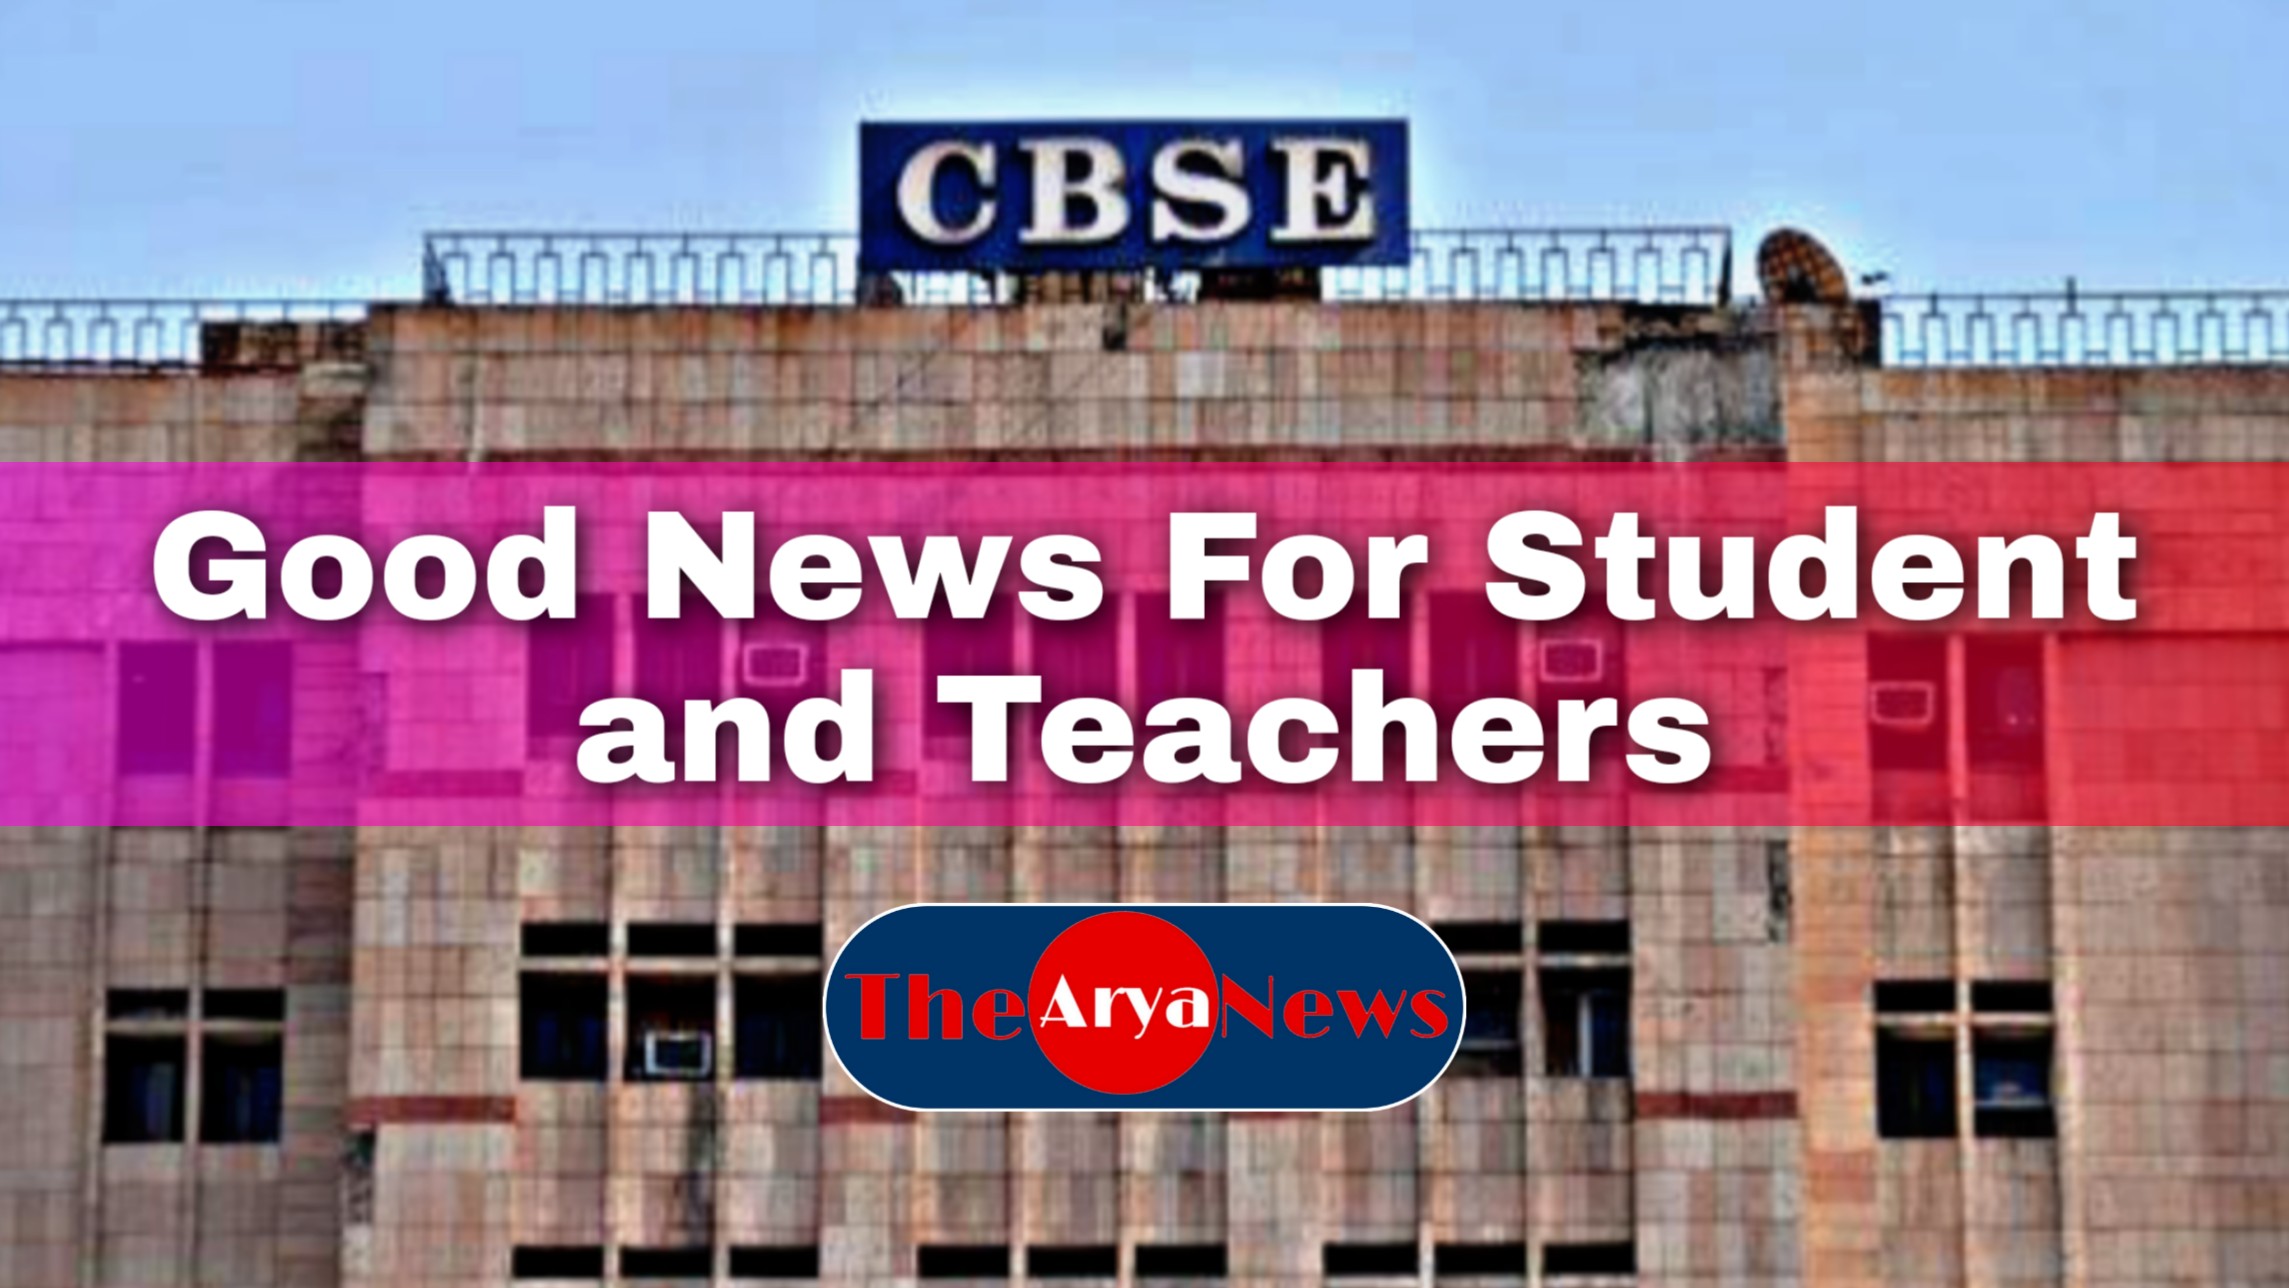 CBSE : Do not increase fees in school lockdown, also give salary to teachers